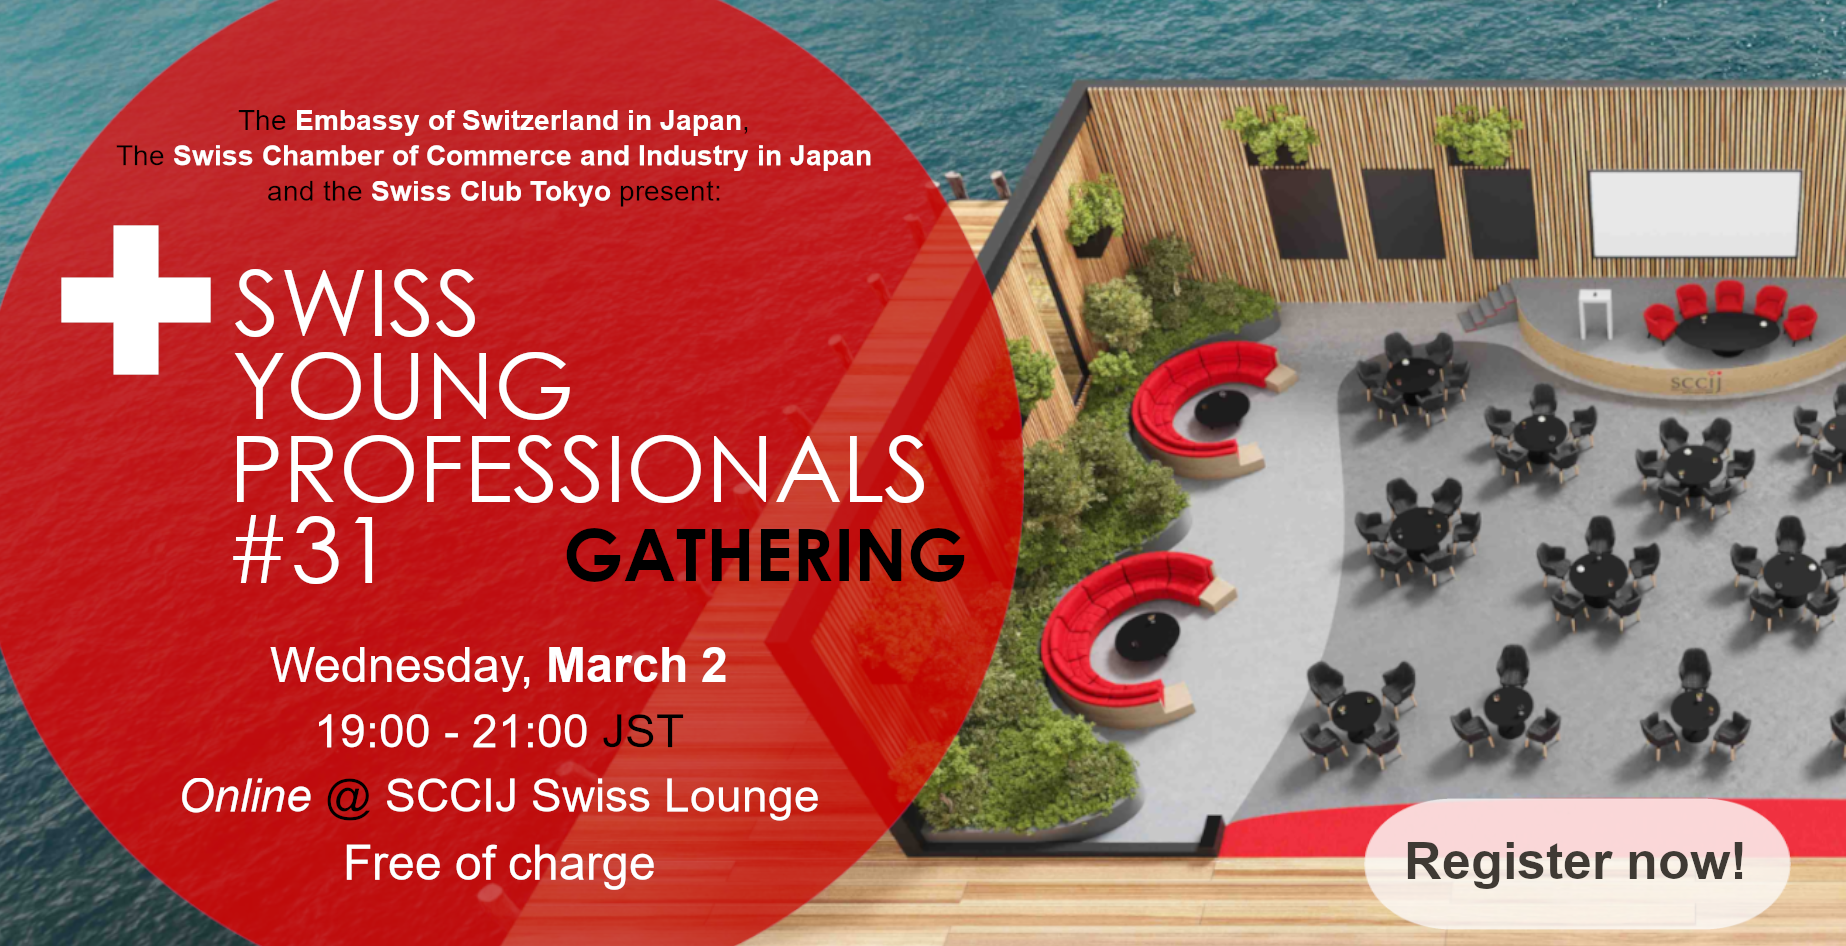 Swiss Young Professionals Gathering #31